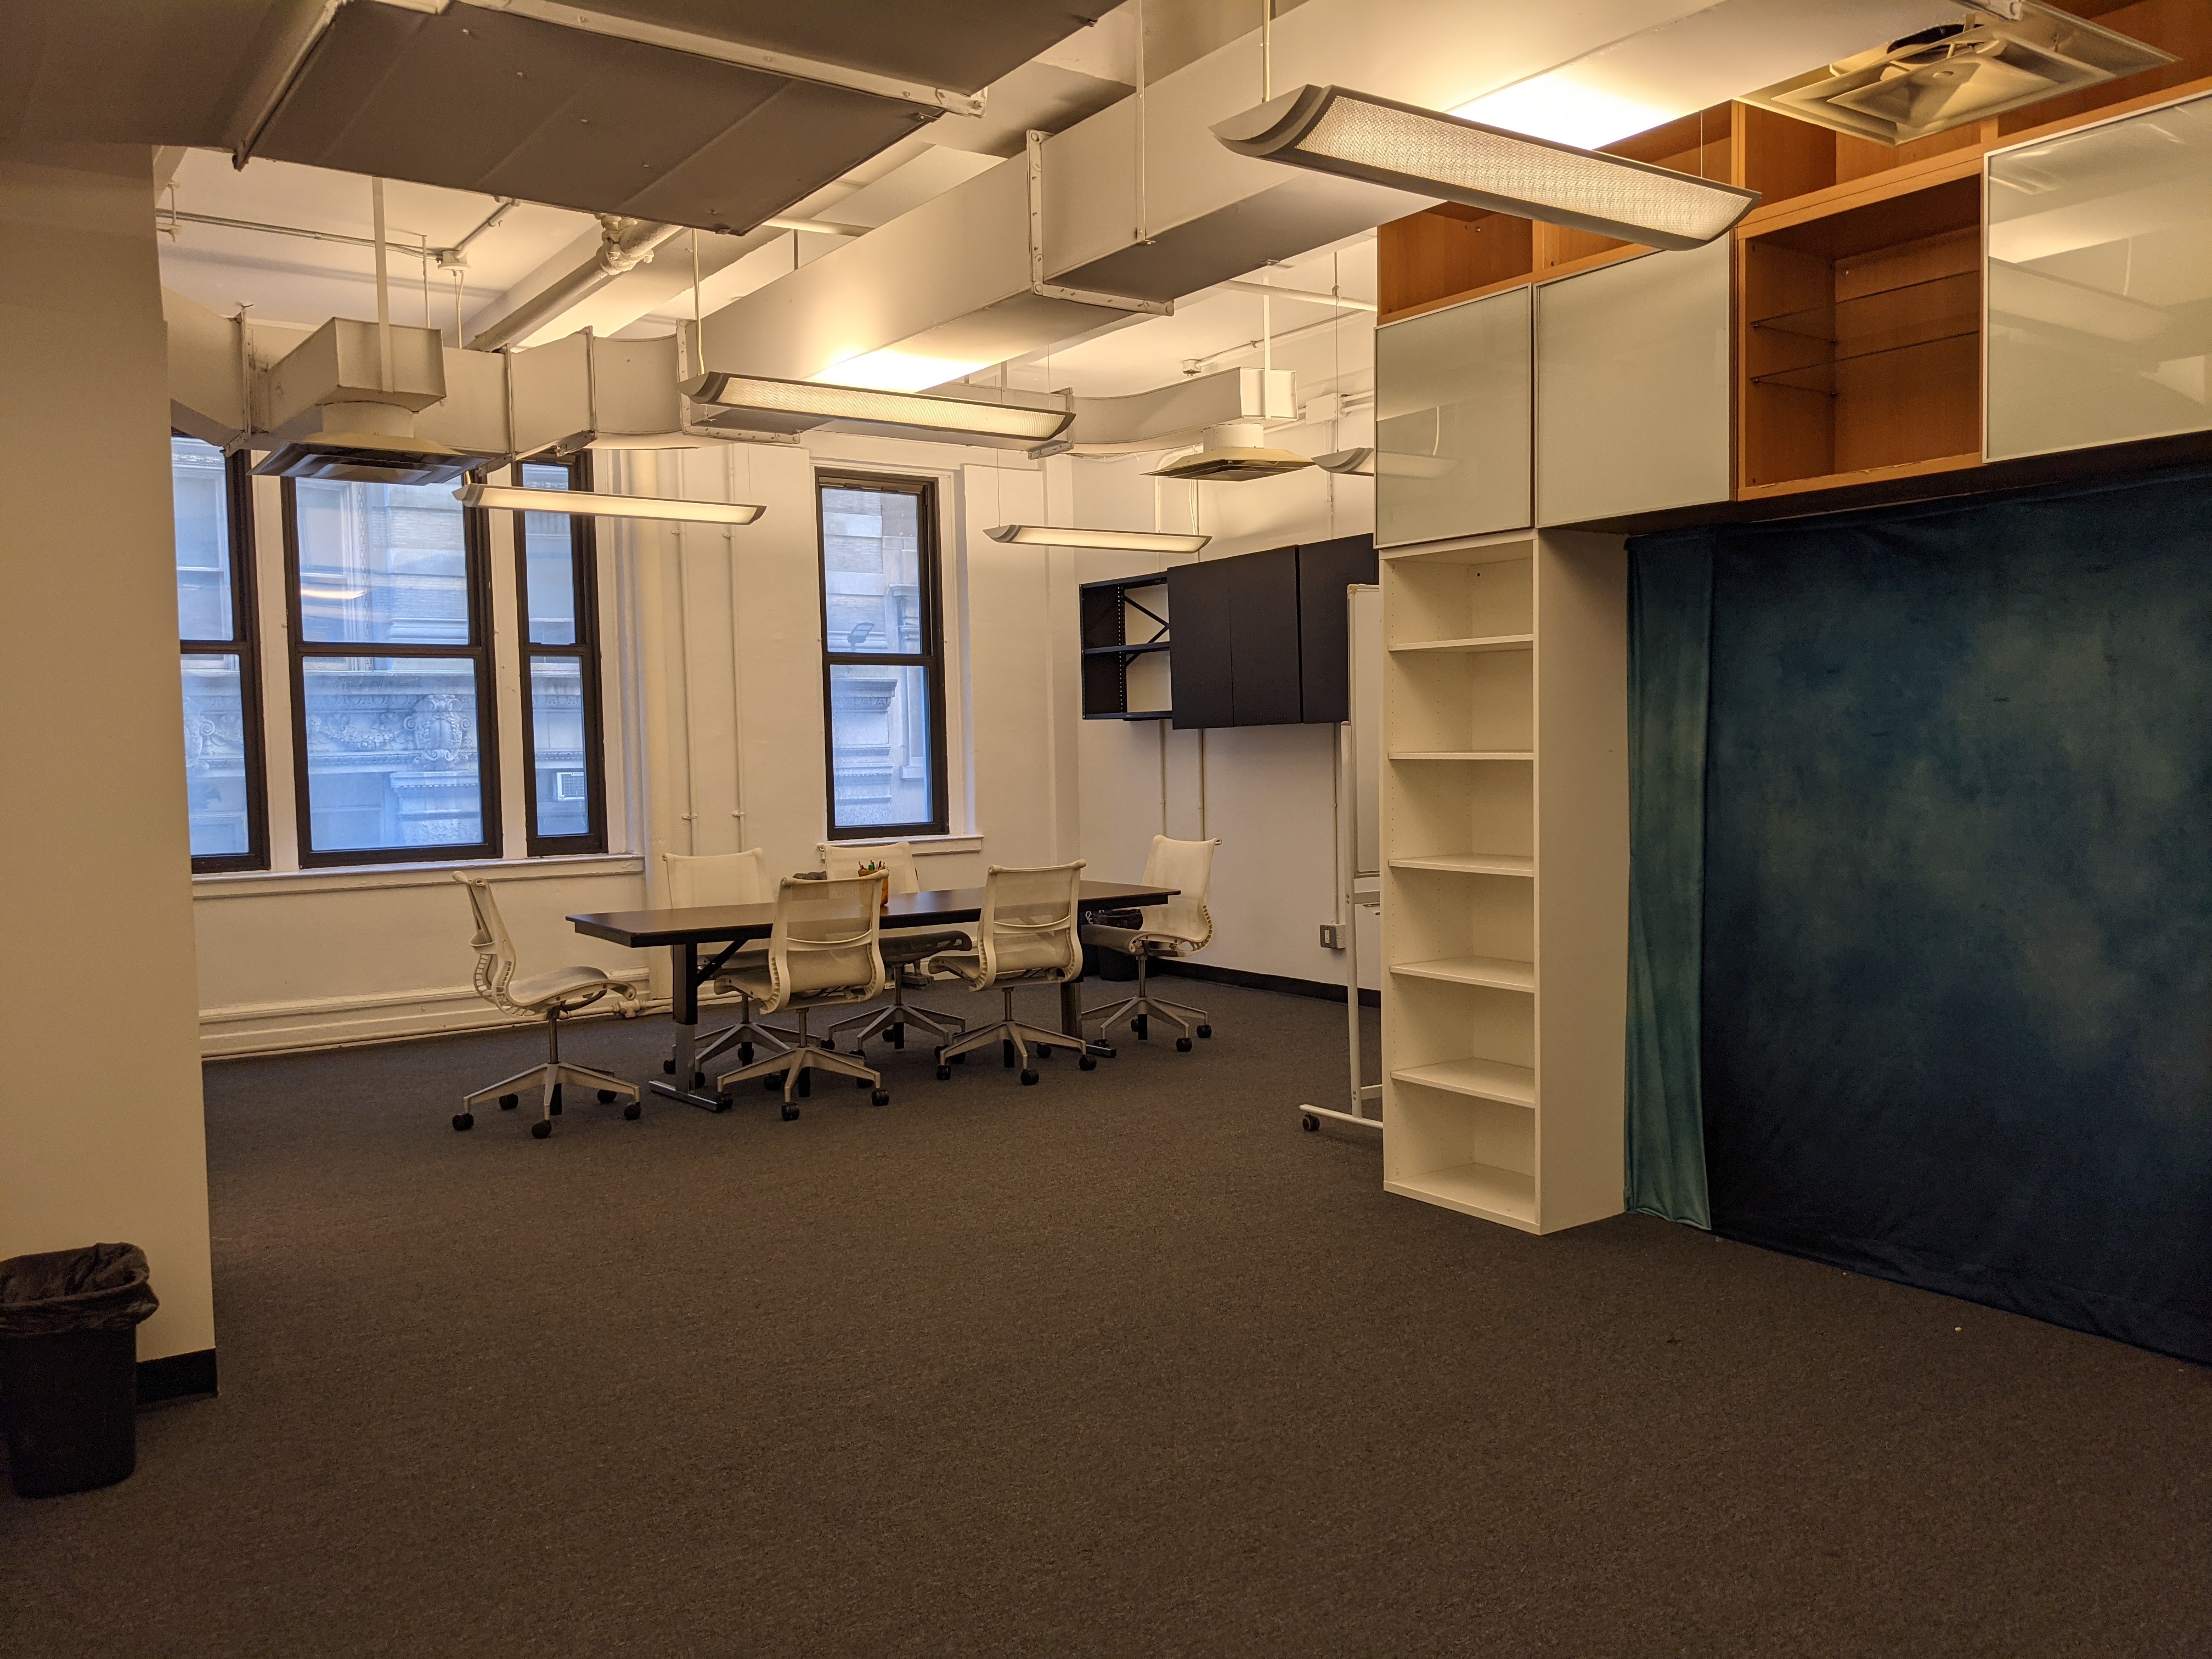 The Conference room At ARTNY